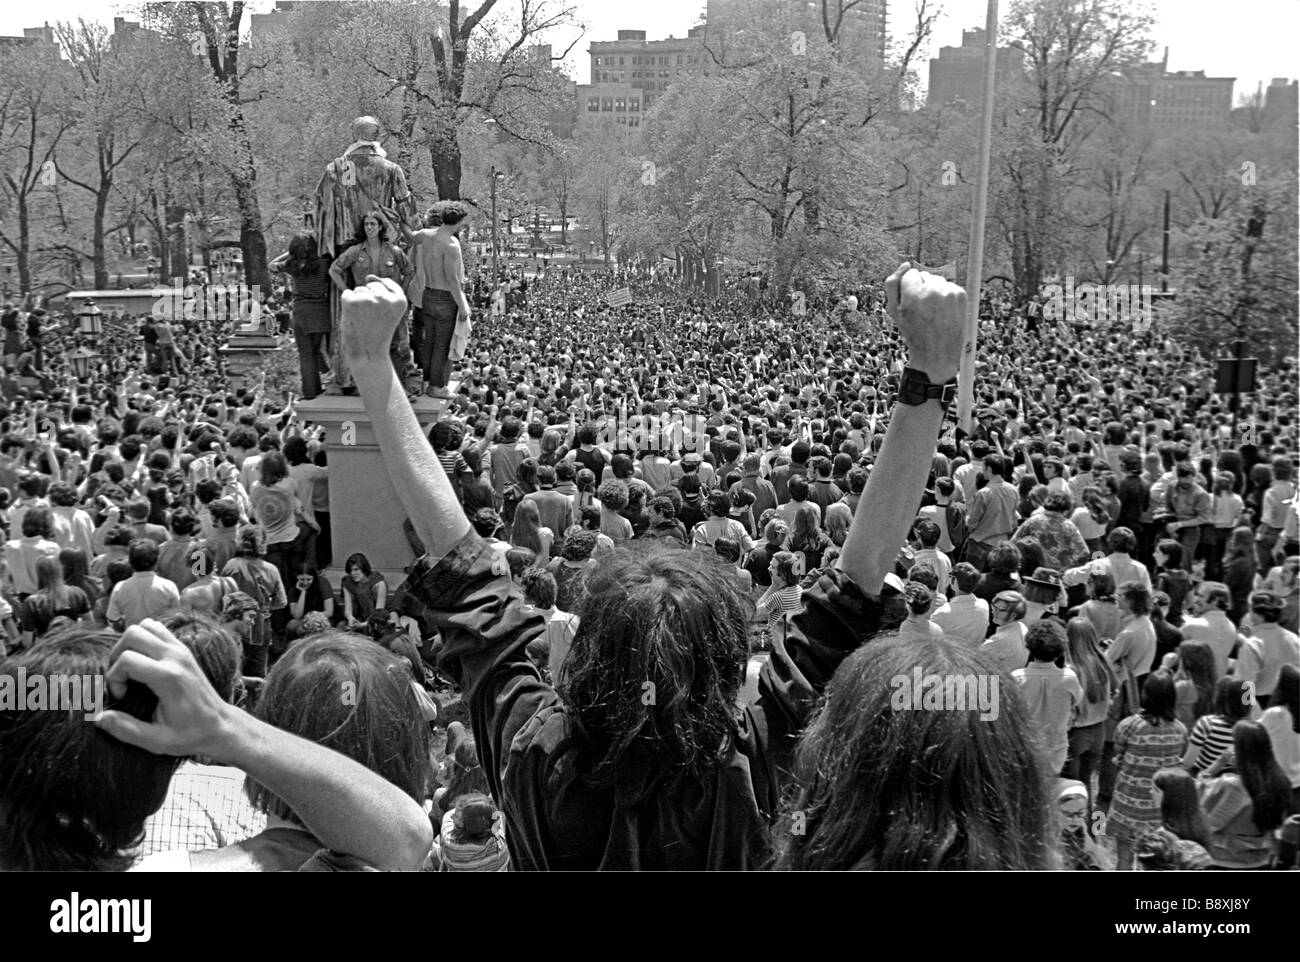 Thousands of anti Vietnam War protesters rally at the Massachusetts State House in Boston in the spring of 1970 Stock Photo